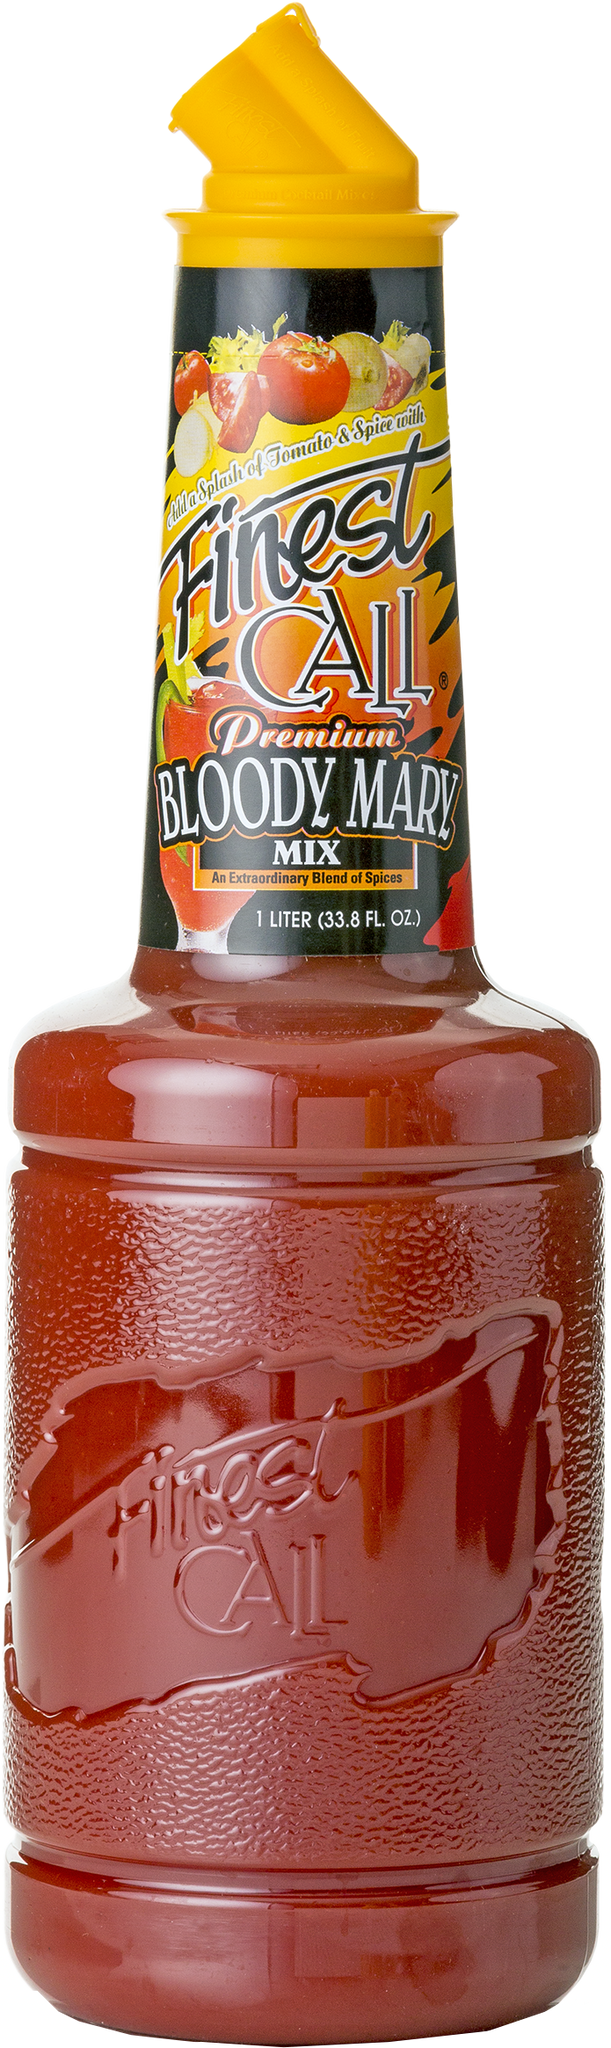 bvi>Mixer, Finest Call, Bloody Mary - 1 ltr